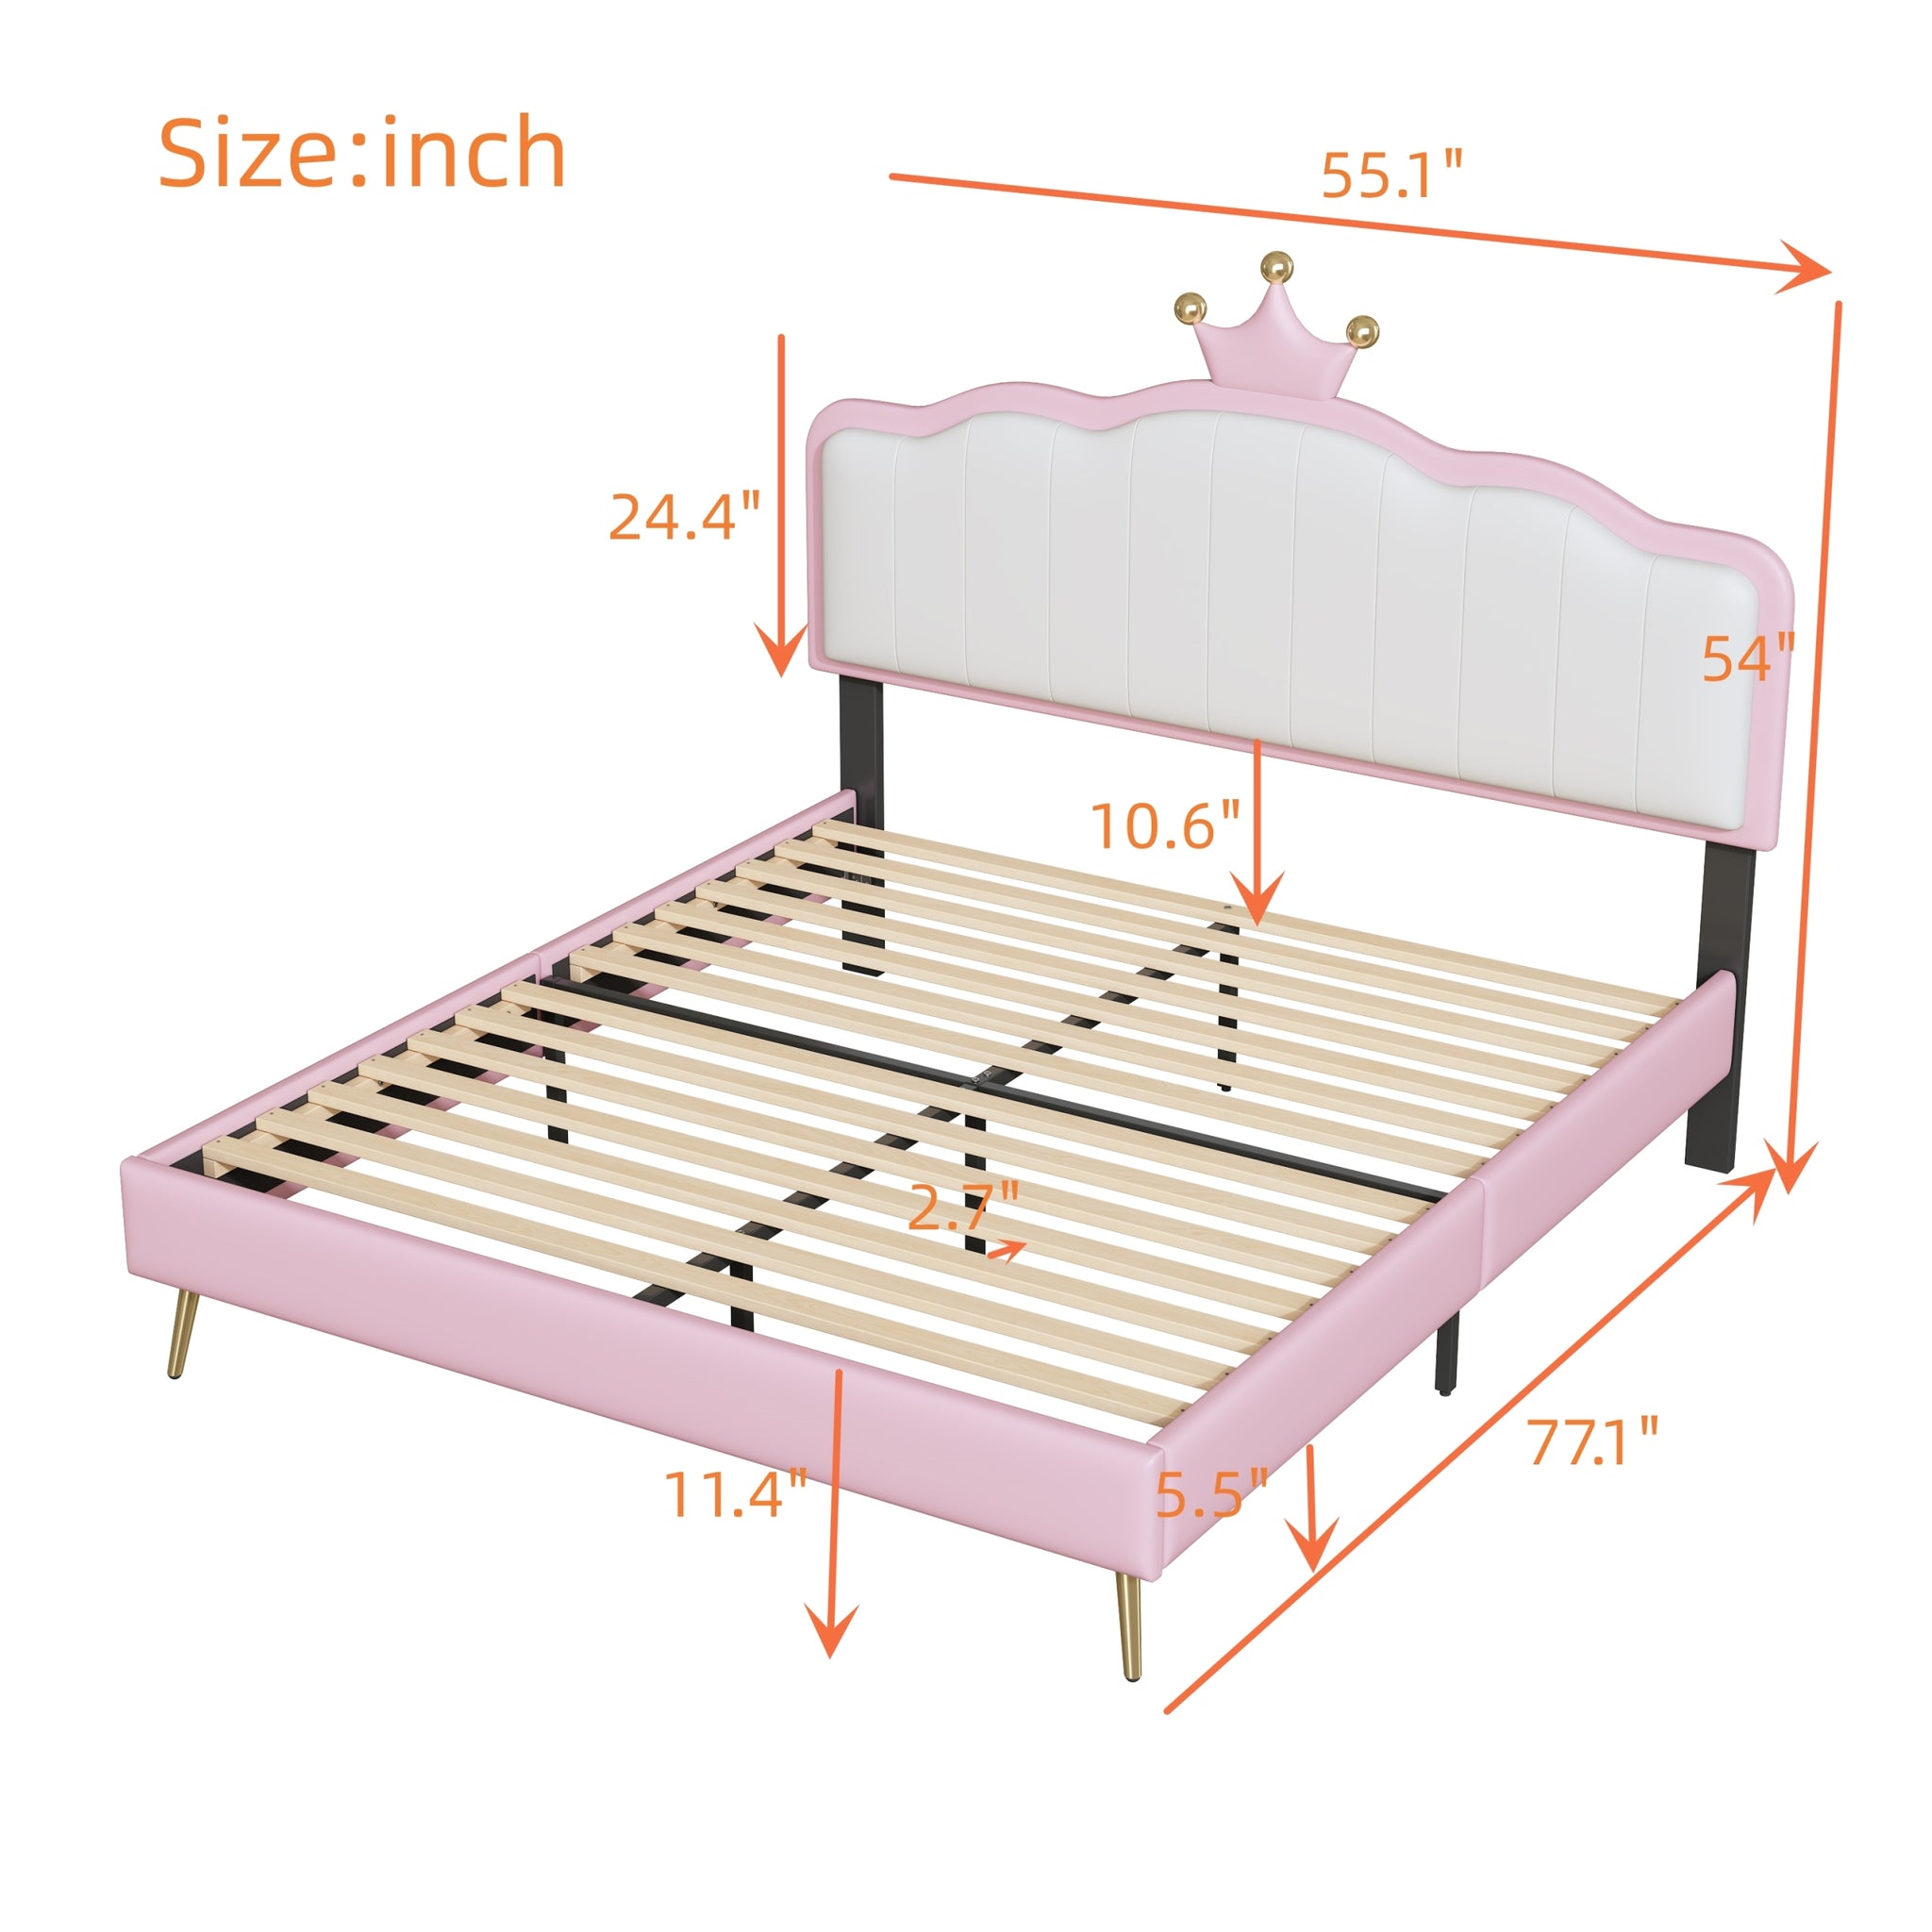 Full size Upholstered Princess Bed With Crown pink-pu